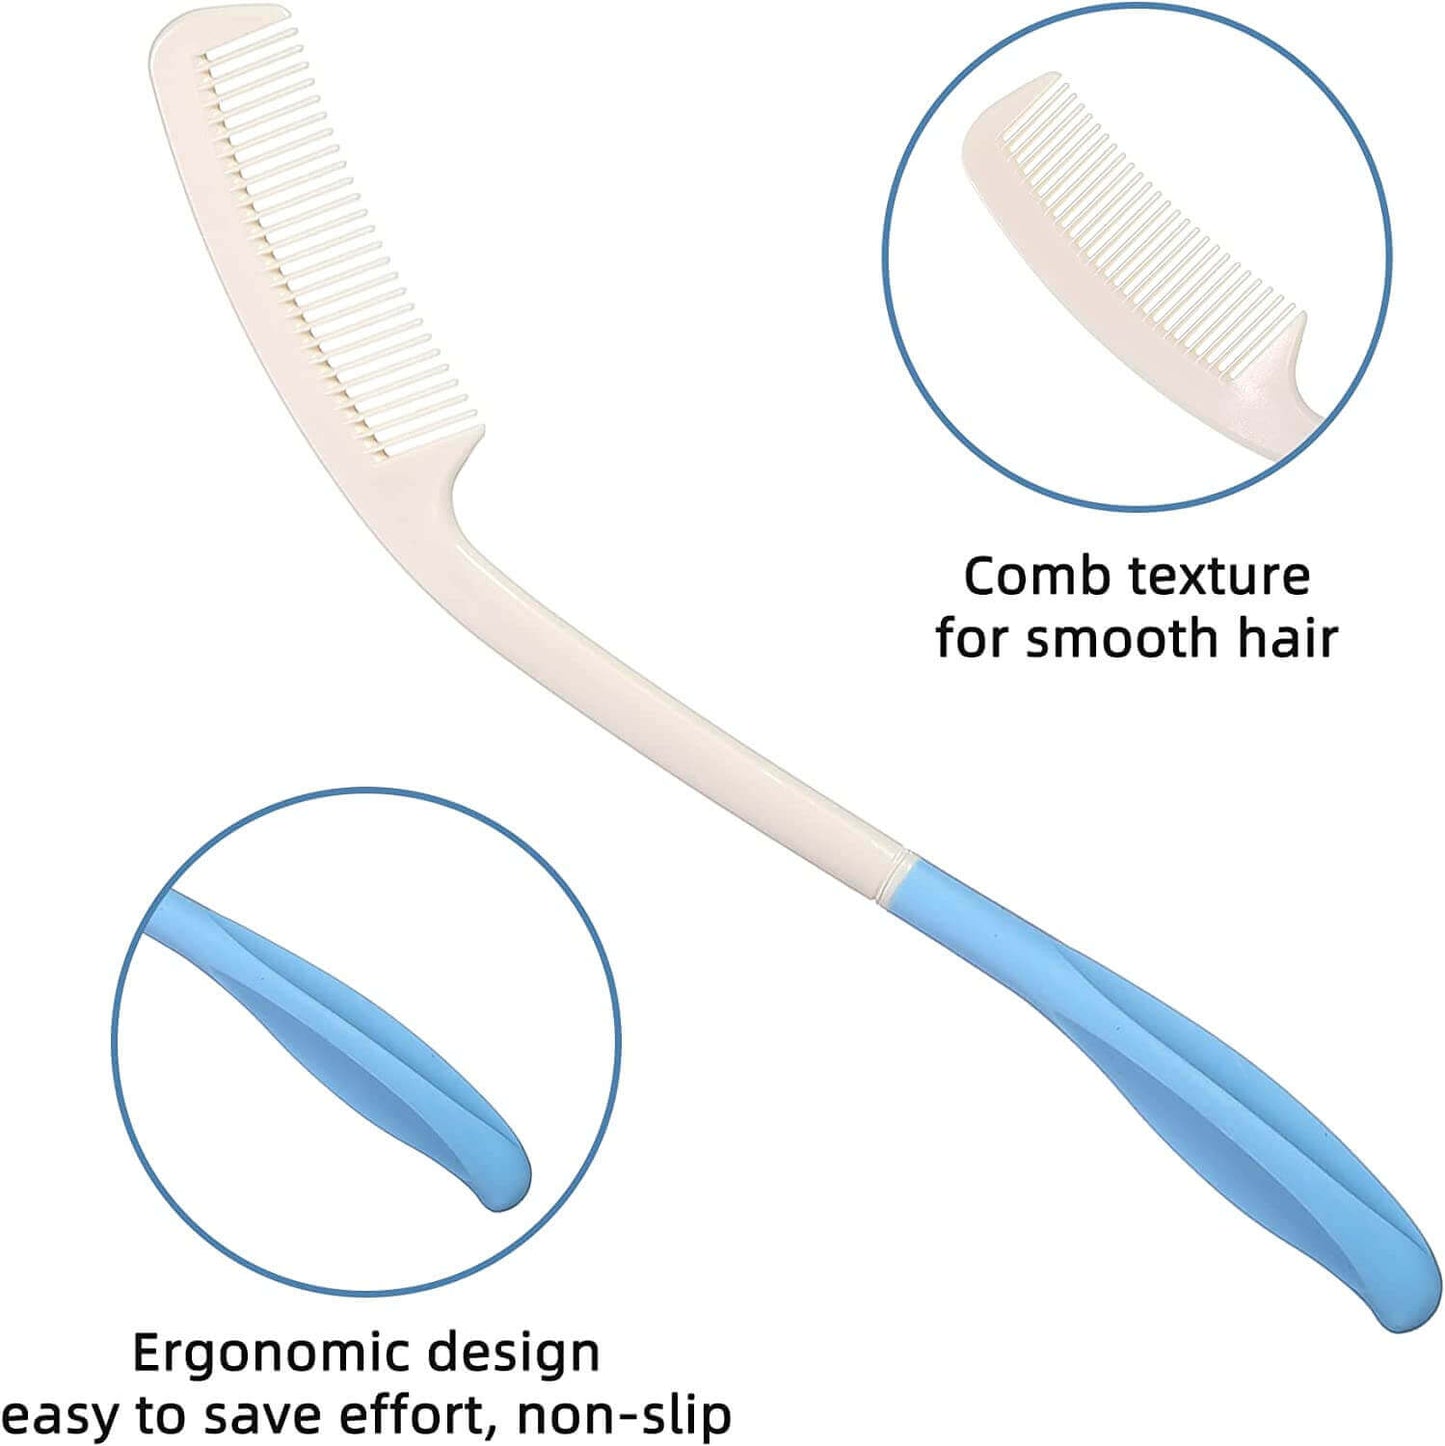 Fanwer's long-handle hair brush and comb, comb details